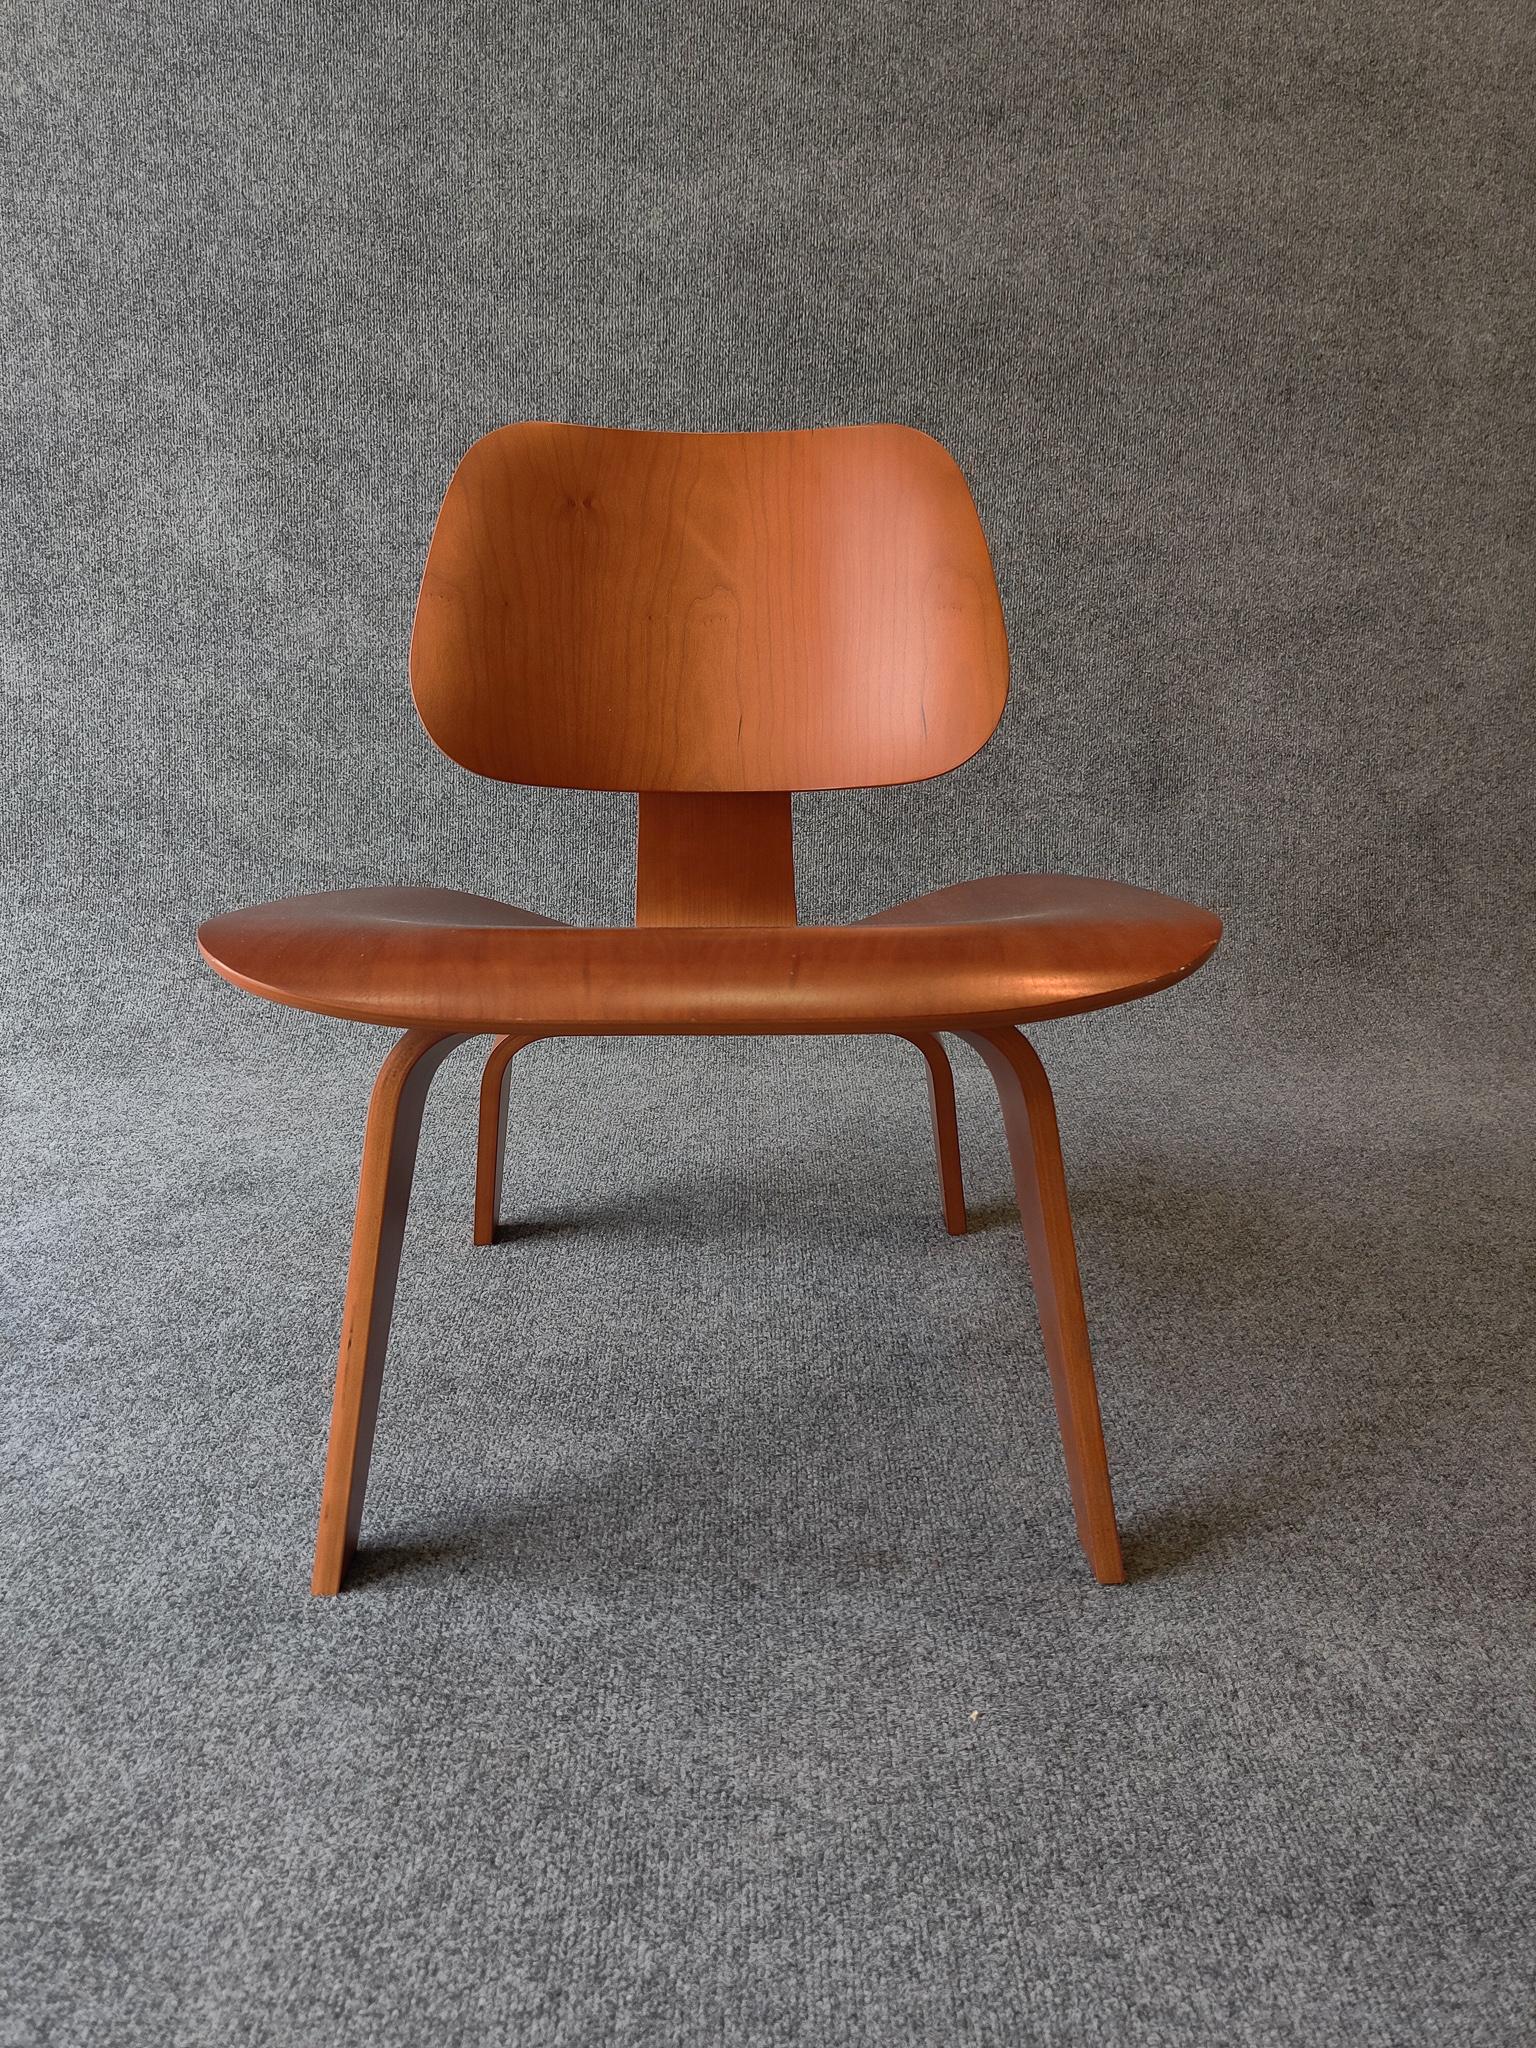 Iconic Eames LCW lounge chair in cherry plywood. Signed and dated. Super comfortable. Very light normal wear to seat area.